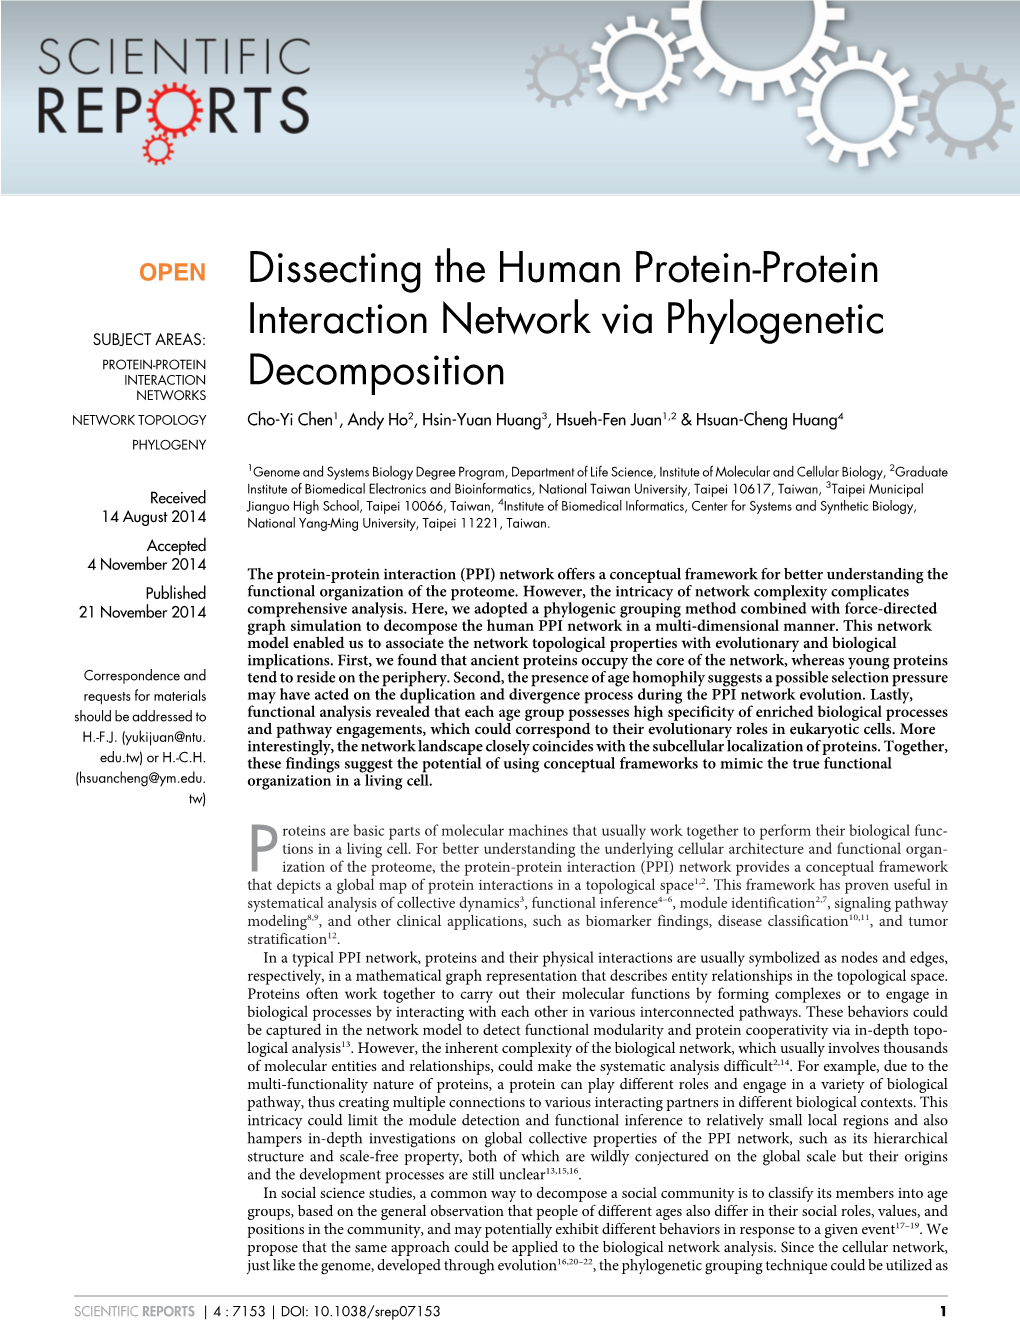 Dissecting the Human Protein-Protein Interaction Network Via